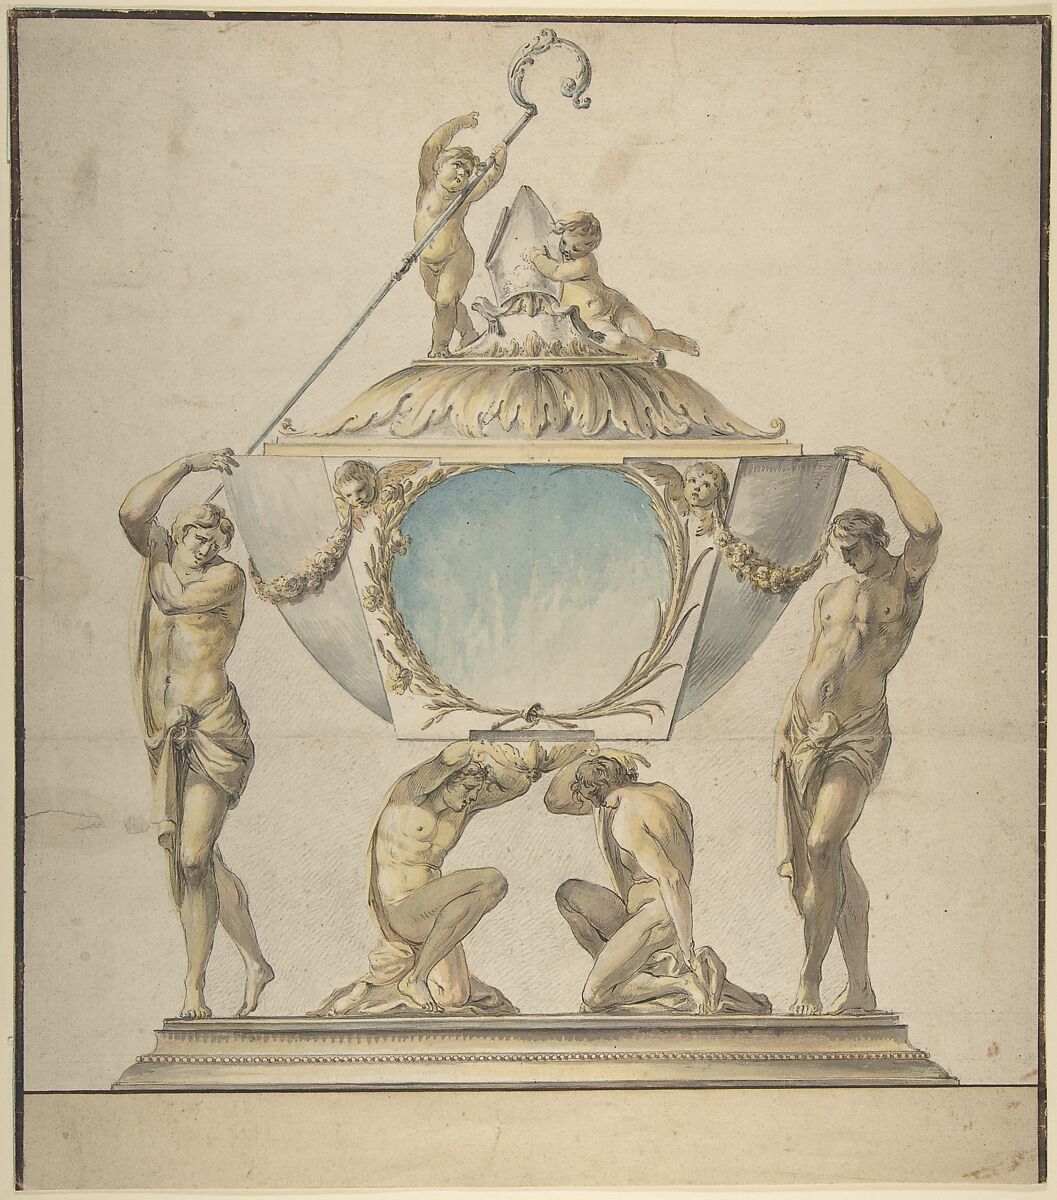 Design for a Gold and Silver Bishop's Reliquary, Luigi Valadier (Italian, Rome 1726–1785 Rome) (?), Pen and black ink, brush with gray, yellow, red and blue wash, highlighted with white gouache over lead or graphite on cream laid paper; framing lines in pen and brown ink 